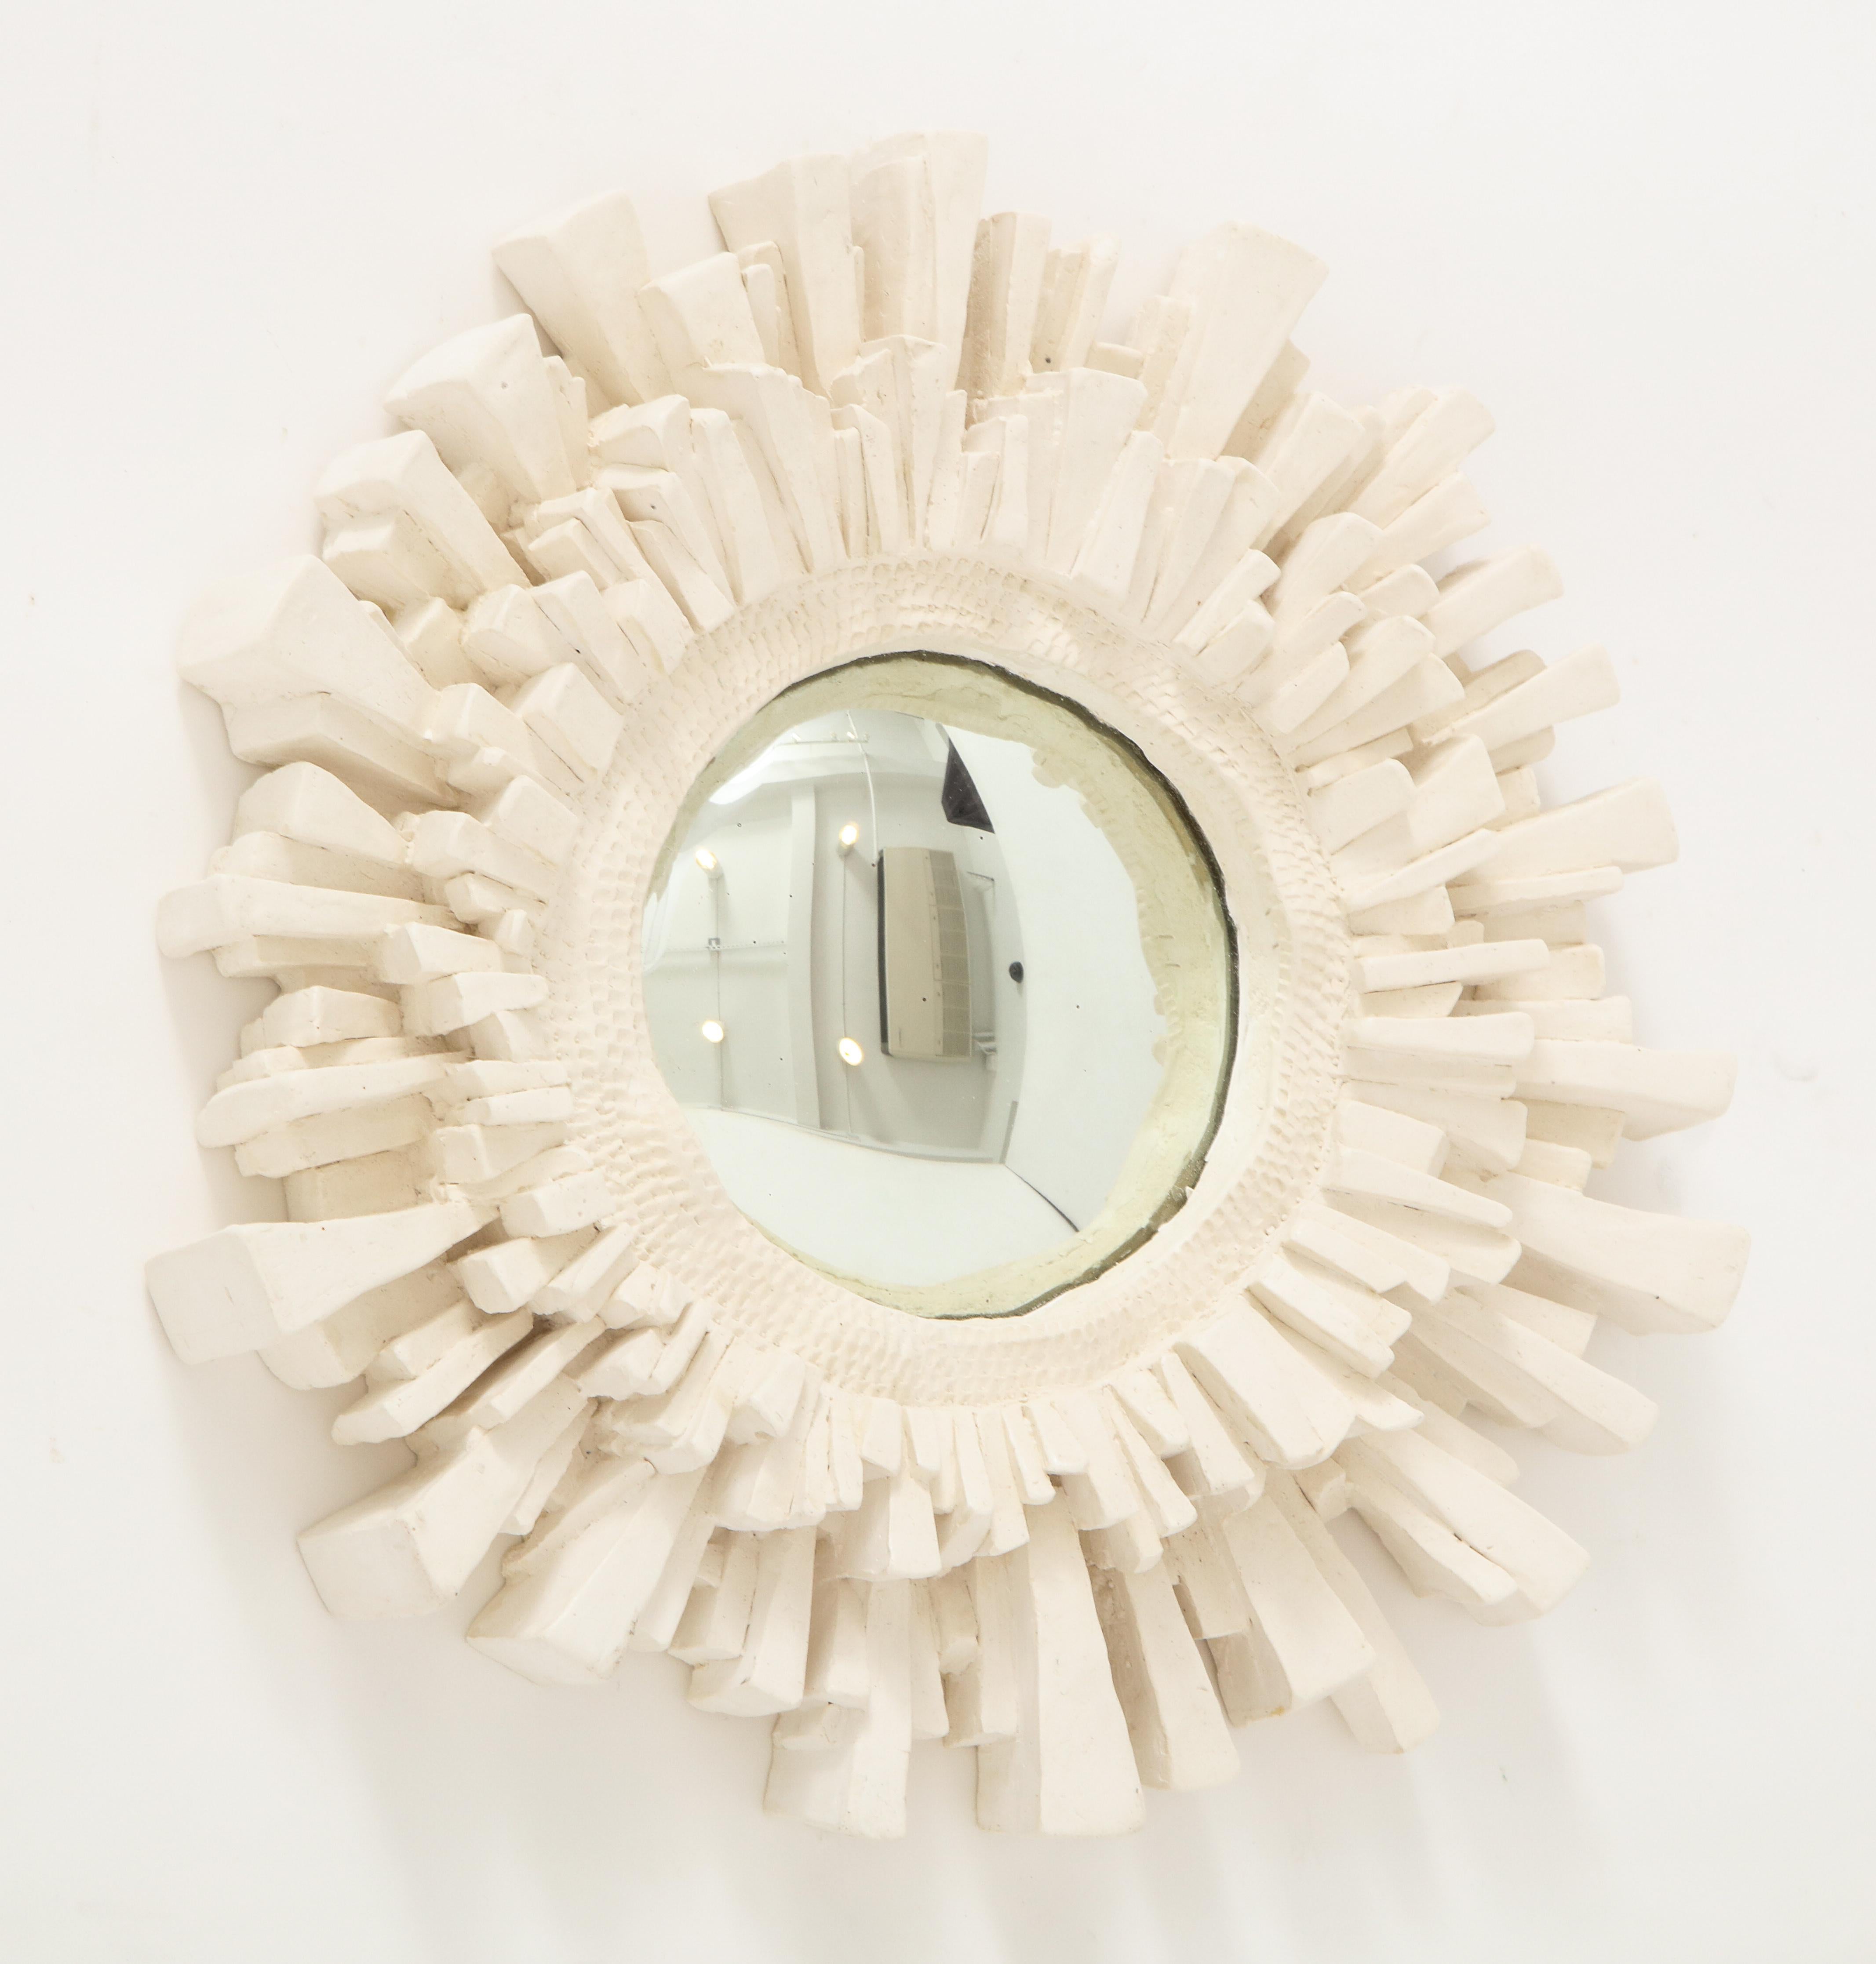 This plaster mirror in the shape of a sun, was created by the French sculptor Vincent V.  We love its wonderful texture, convex glass andi asymmetrical form.  Its clean, neutral color make it suitable for any color scheme.  One of several in our